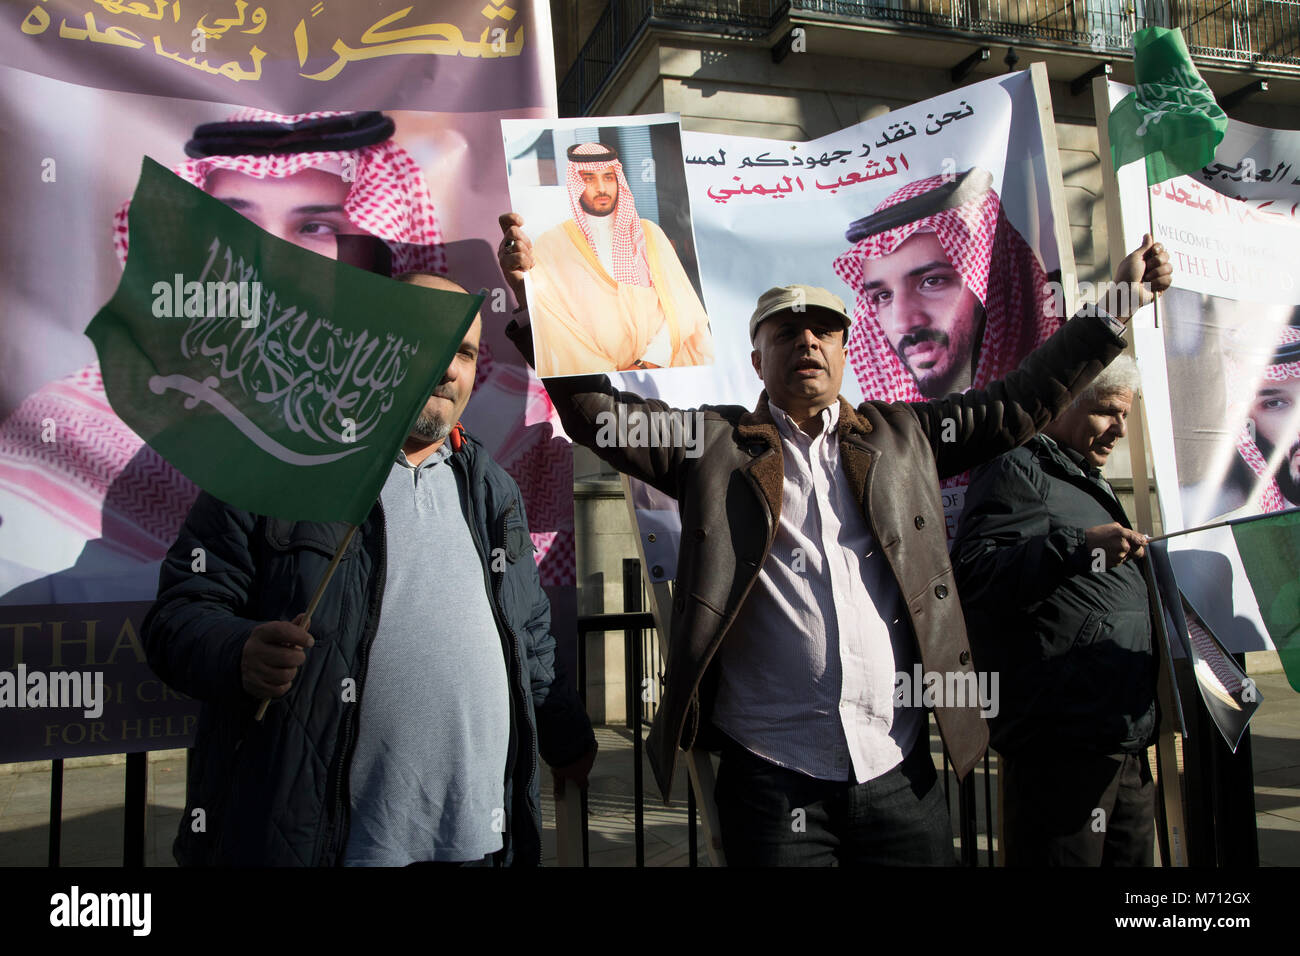 London, UK. 7th March, 2018. Protesters demonstrate on Whitehall in favour of Saudi Crown Prince Mohammad Bin Salman official visit to the UK on 7th March 2018 in London, United Kingdom. Mohammad bin Salman started his visit to the UK with the Conservative Party and royal family rolling out the red carpet for Saudi Arabias crown prince as opposition politicians and rights groups call on the British Prime Minister to use the trip to challenge the kingdoms record on human rights. bes as the worlds wo Credit: Michael Kemp/Alamy Live News Stock Photo